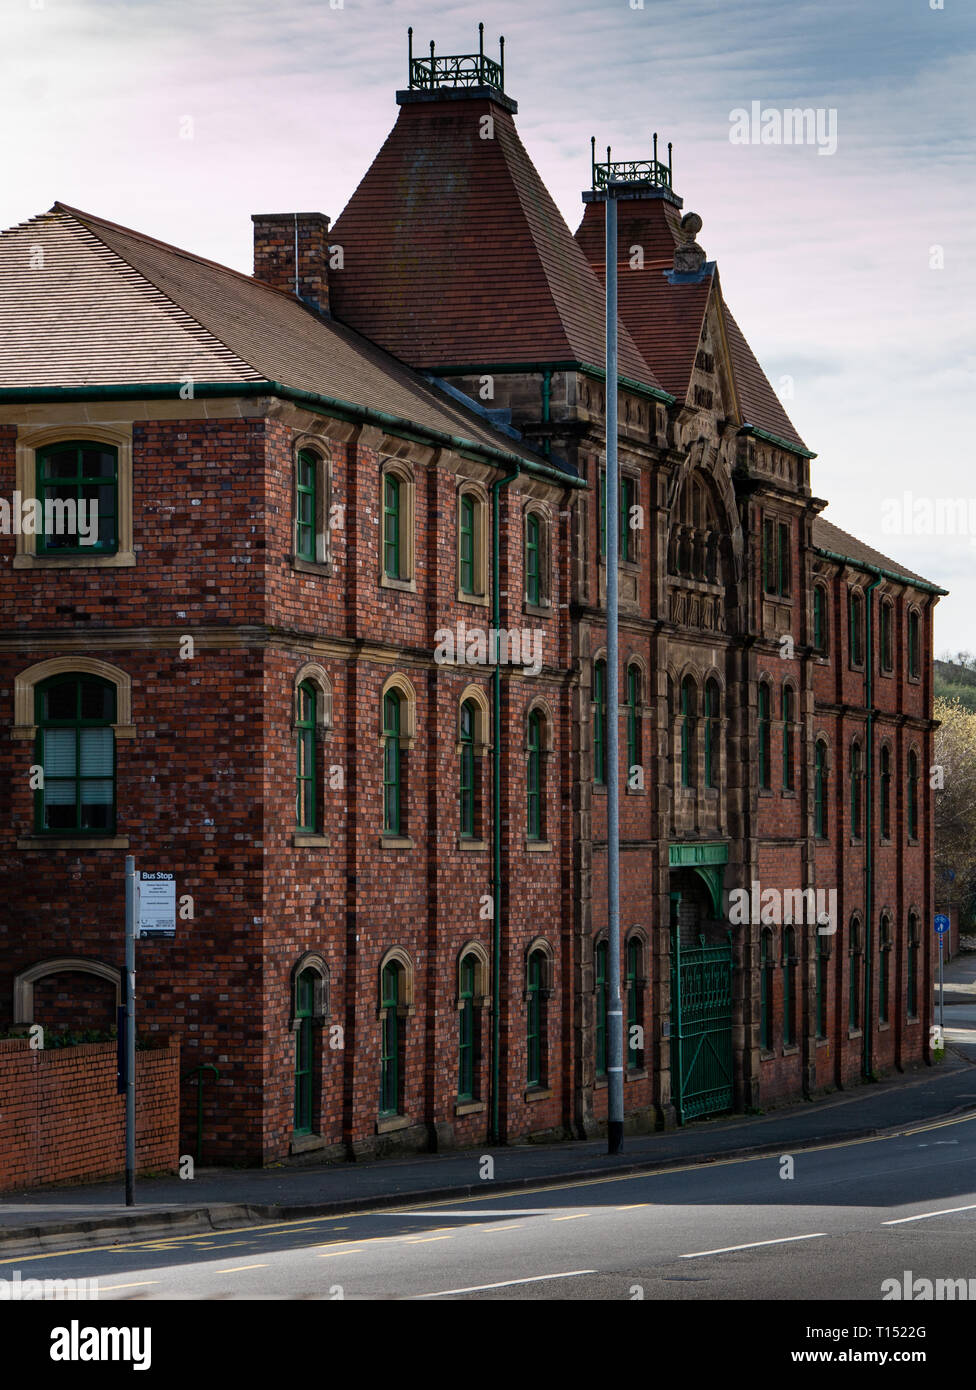 Facade of the old Twyfords bathrooms factory at Cliffe Vale, Stoke-on-Trent, Staffordshire, UK. Now Lock 38 apartments behind the restored facade Stock Photo